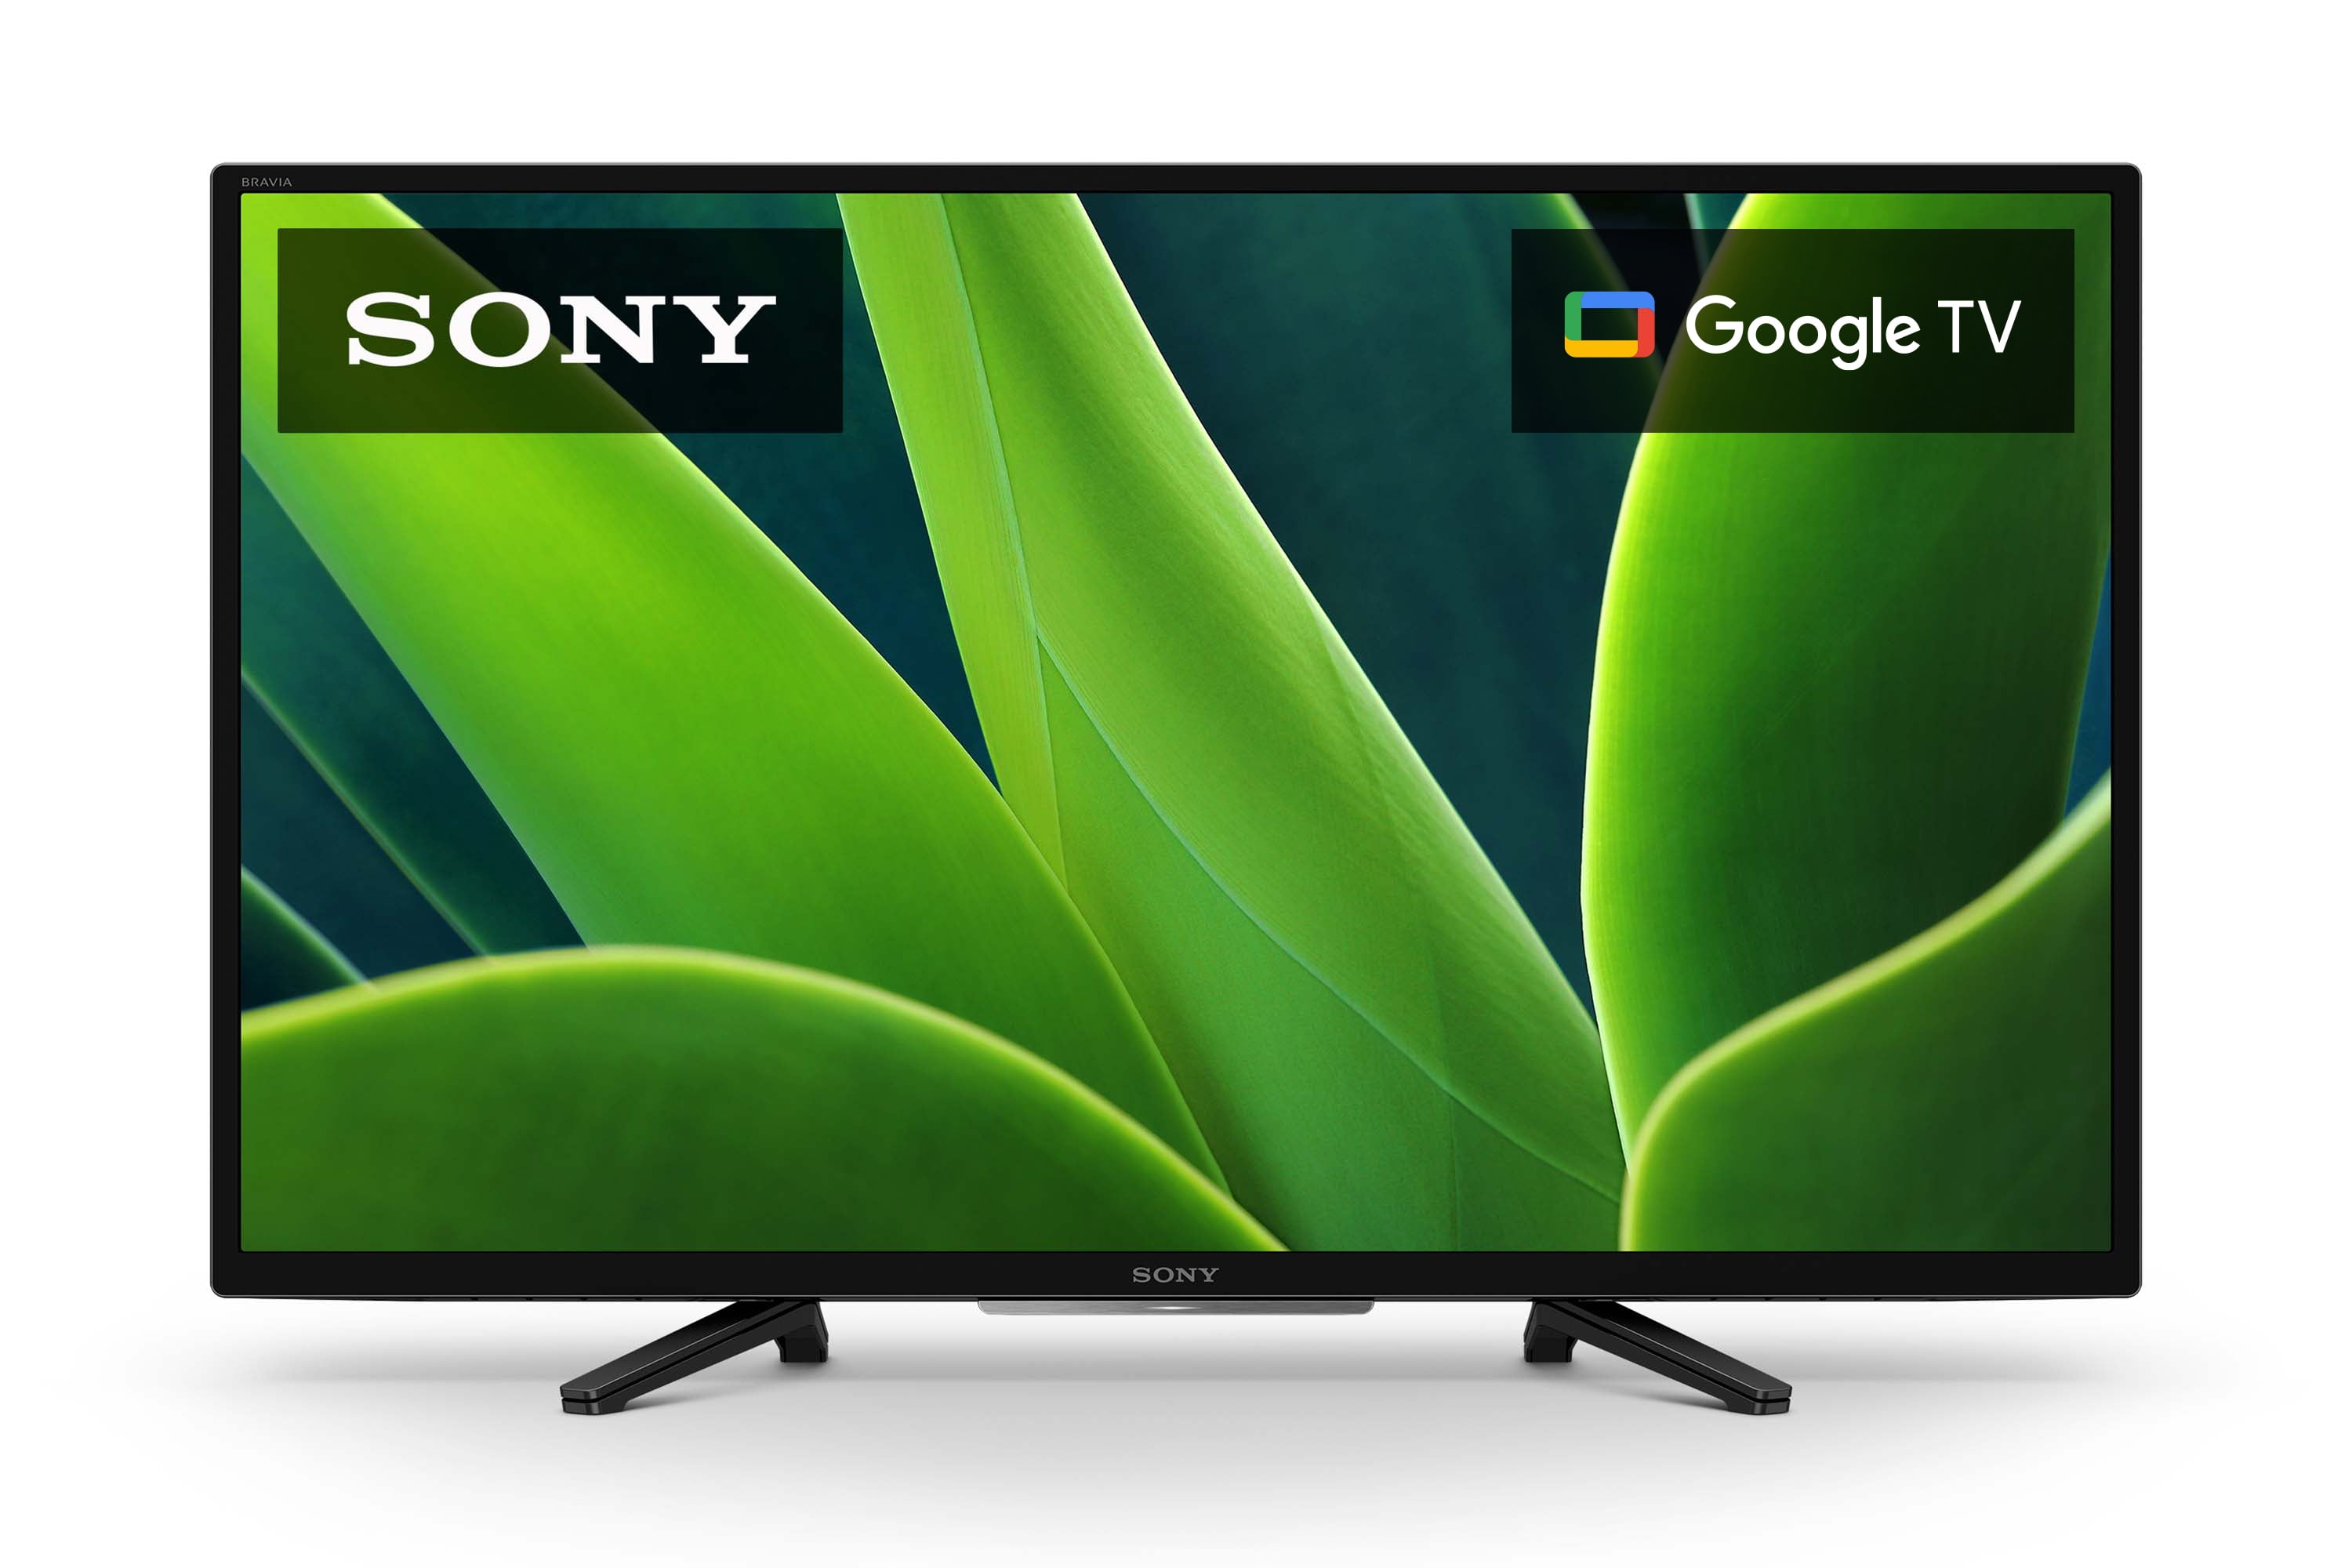 Sony 32” Class W830K 720p HD LED HDR TV with Google TV and Google  Assistant-2022 Model